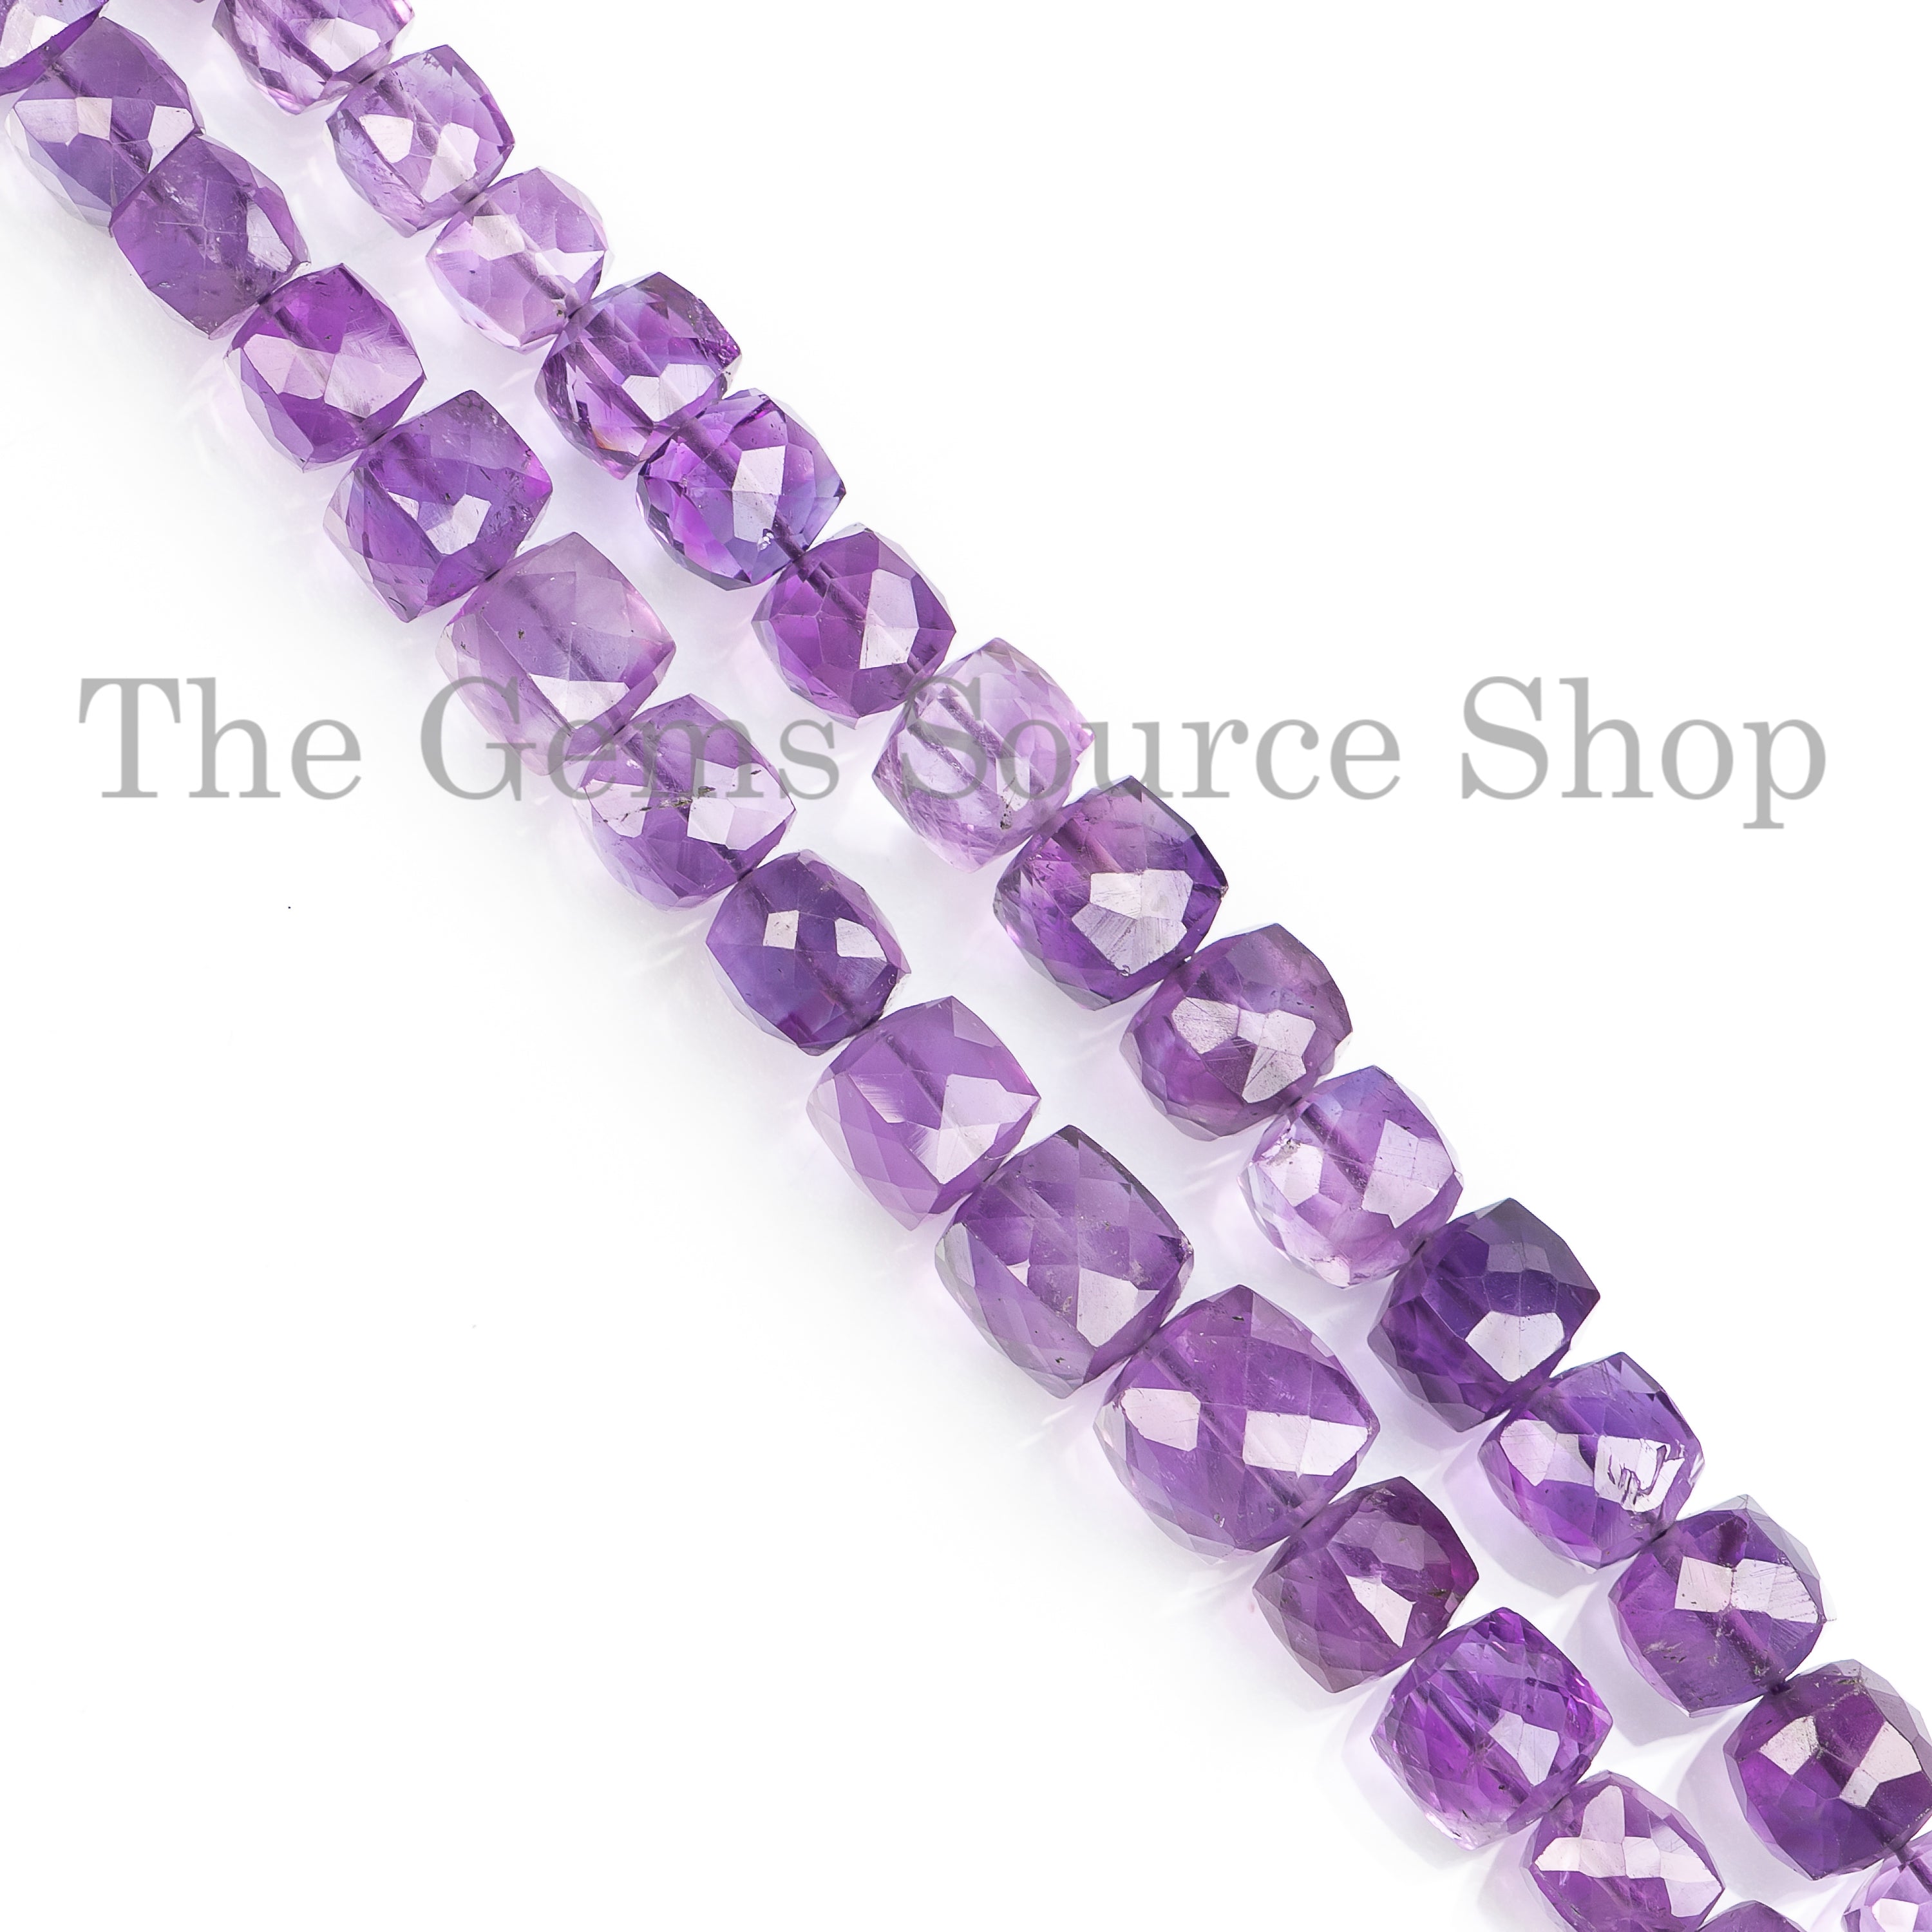 5-7 mm Amethyst Faceted Beads, Amethyst Beads, Amethyst box Shape Natural Beads, Amethyst faceted Gemstone Beads, Amethyst Jewelry Beads